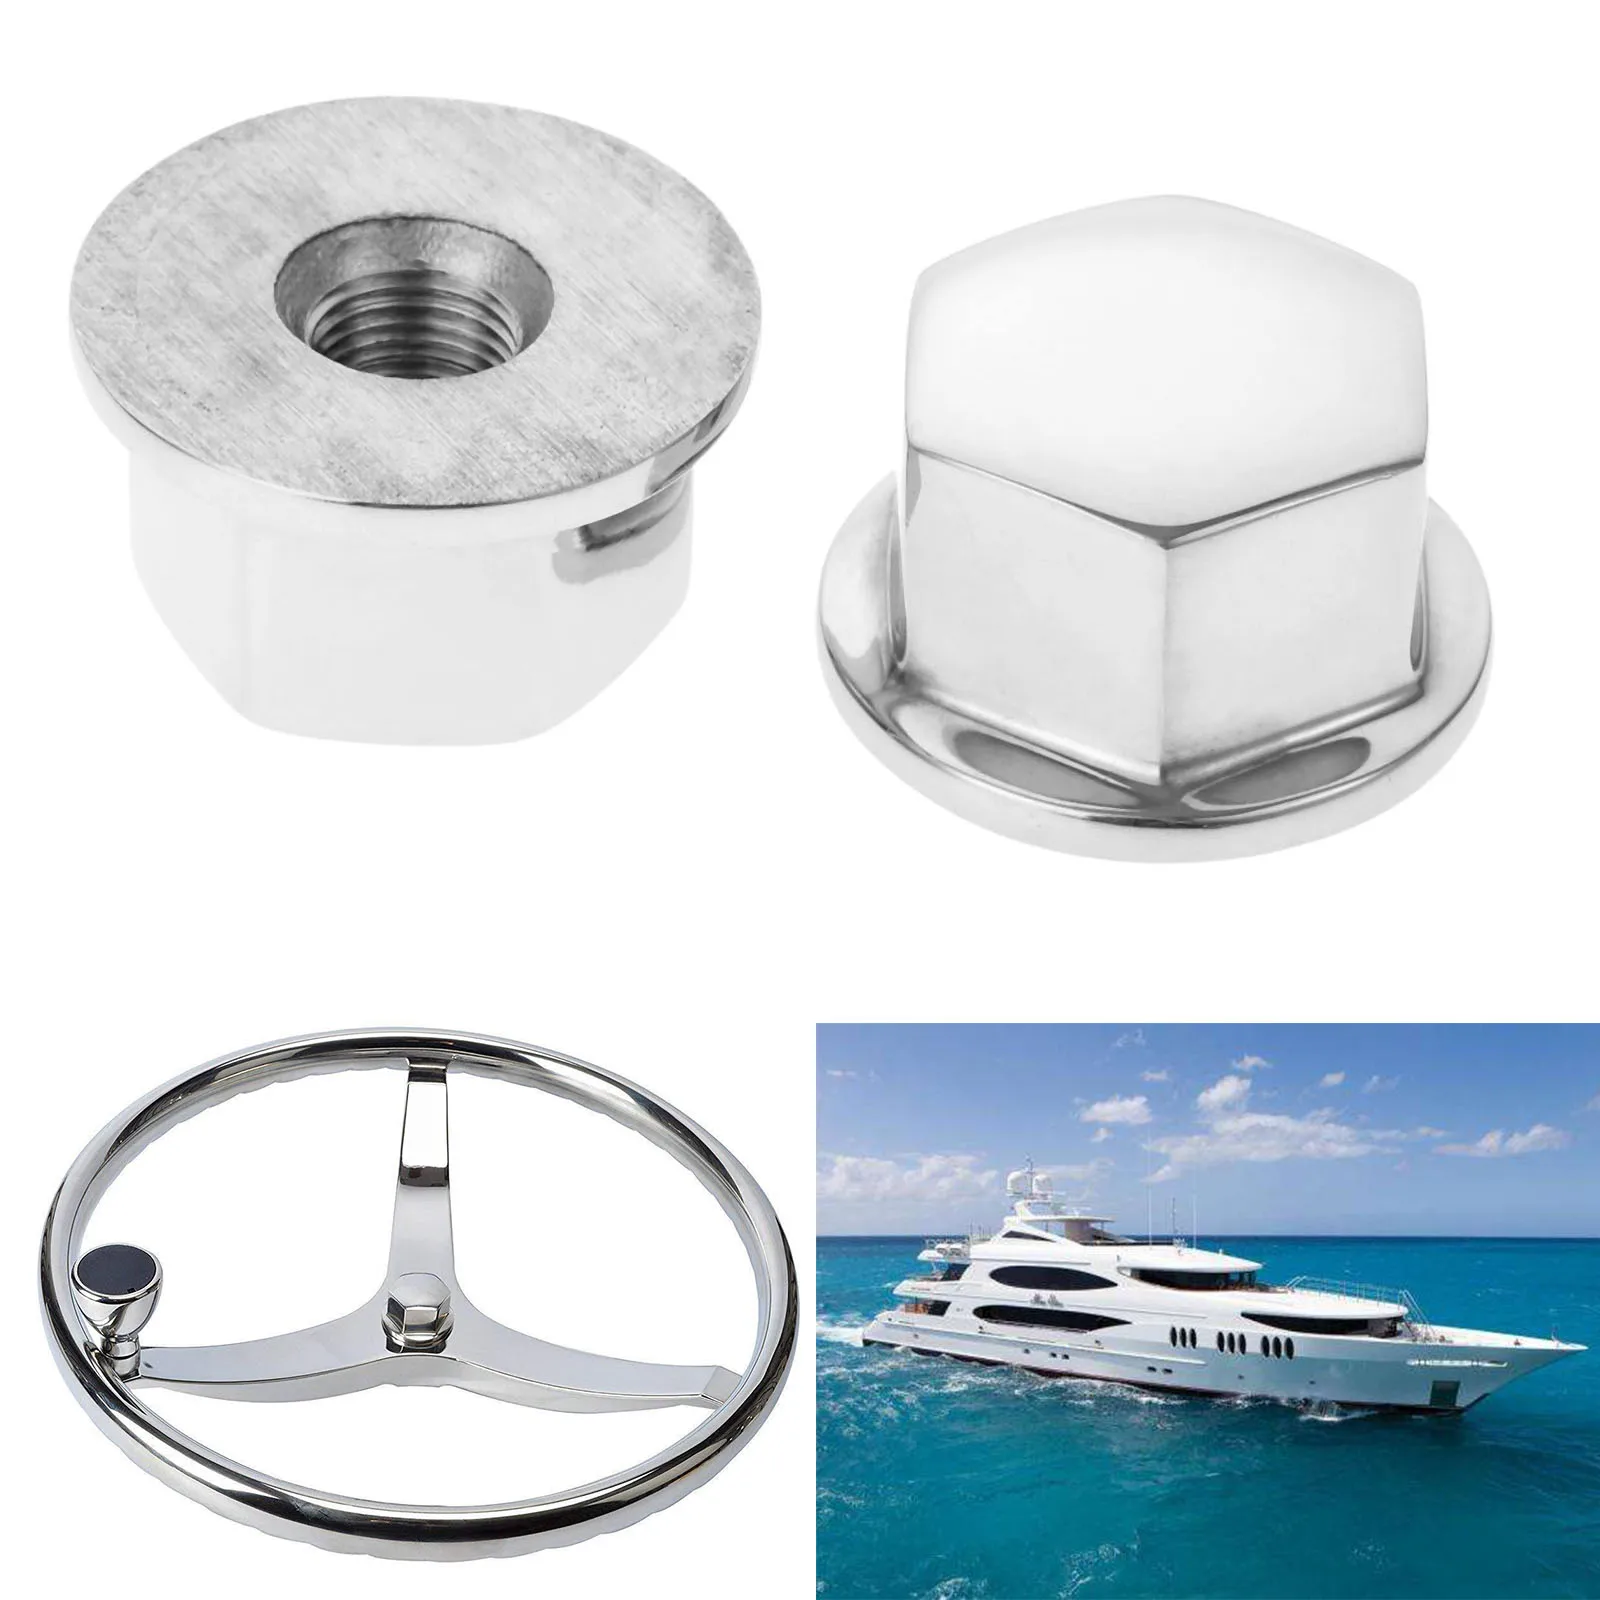 1/2in - 20 Thread Marine Grade 316 Stainless Steel Kayak Yacht Steering Wheel Mounting Center Hub Dome Nut For Boats Accessories kayak rudder system parts boat canoe rudder kayak fishing boat sailing accessories steering system